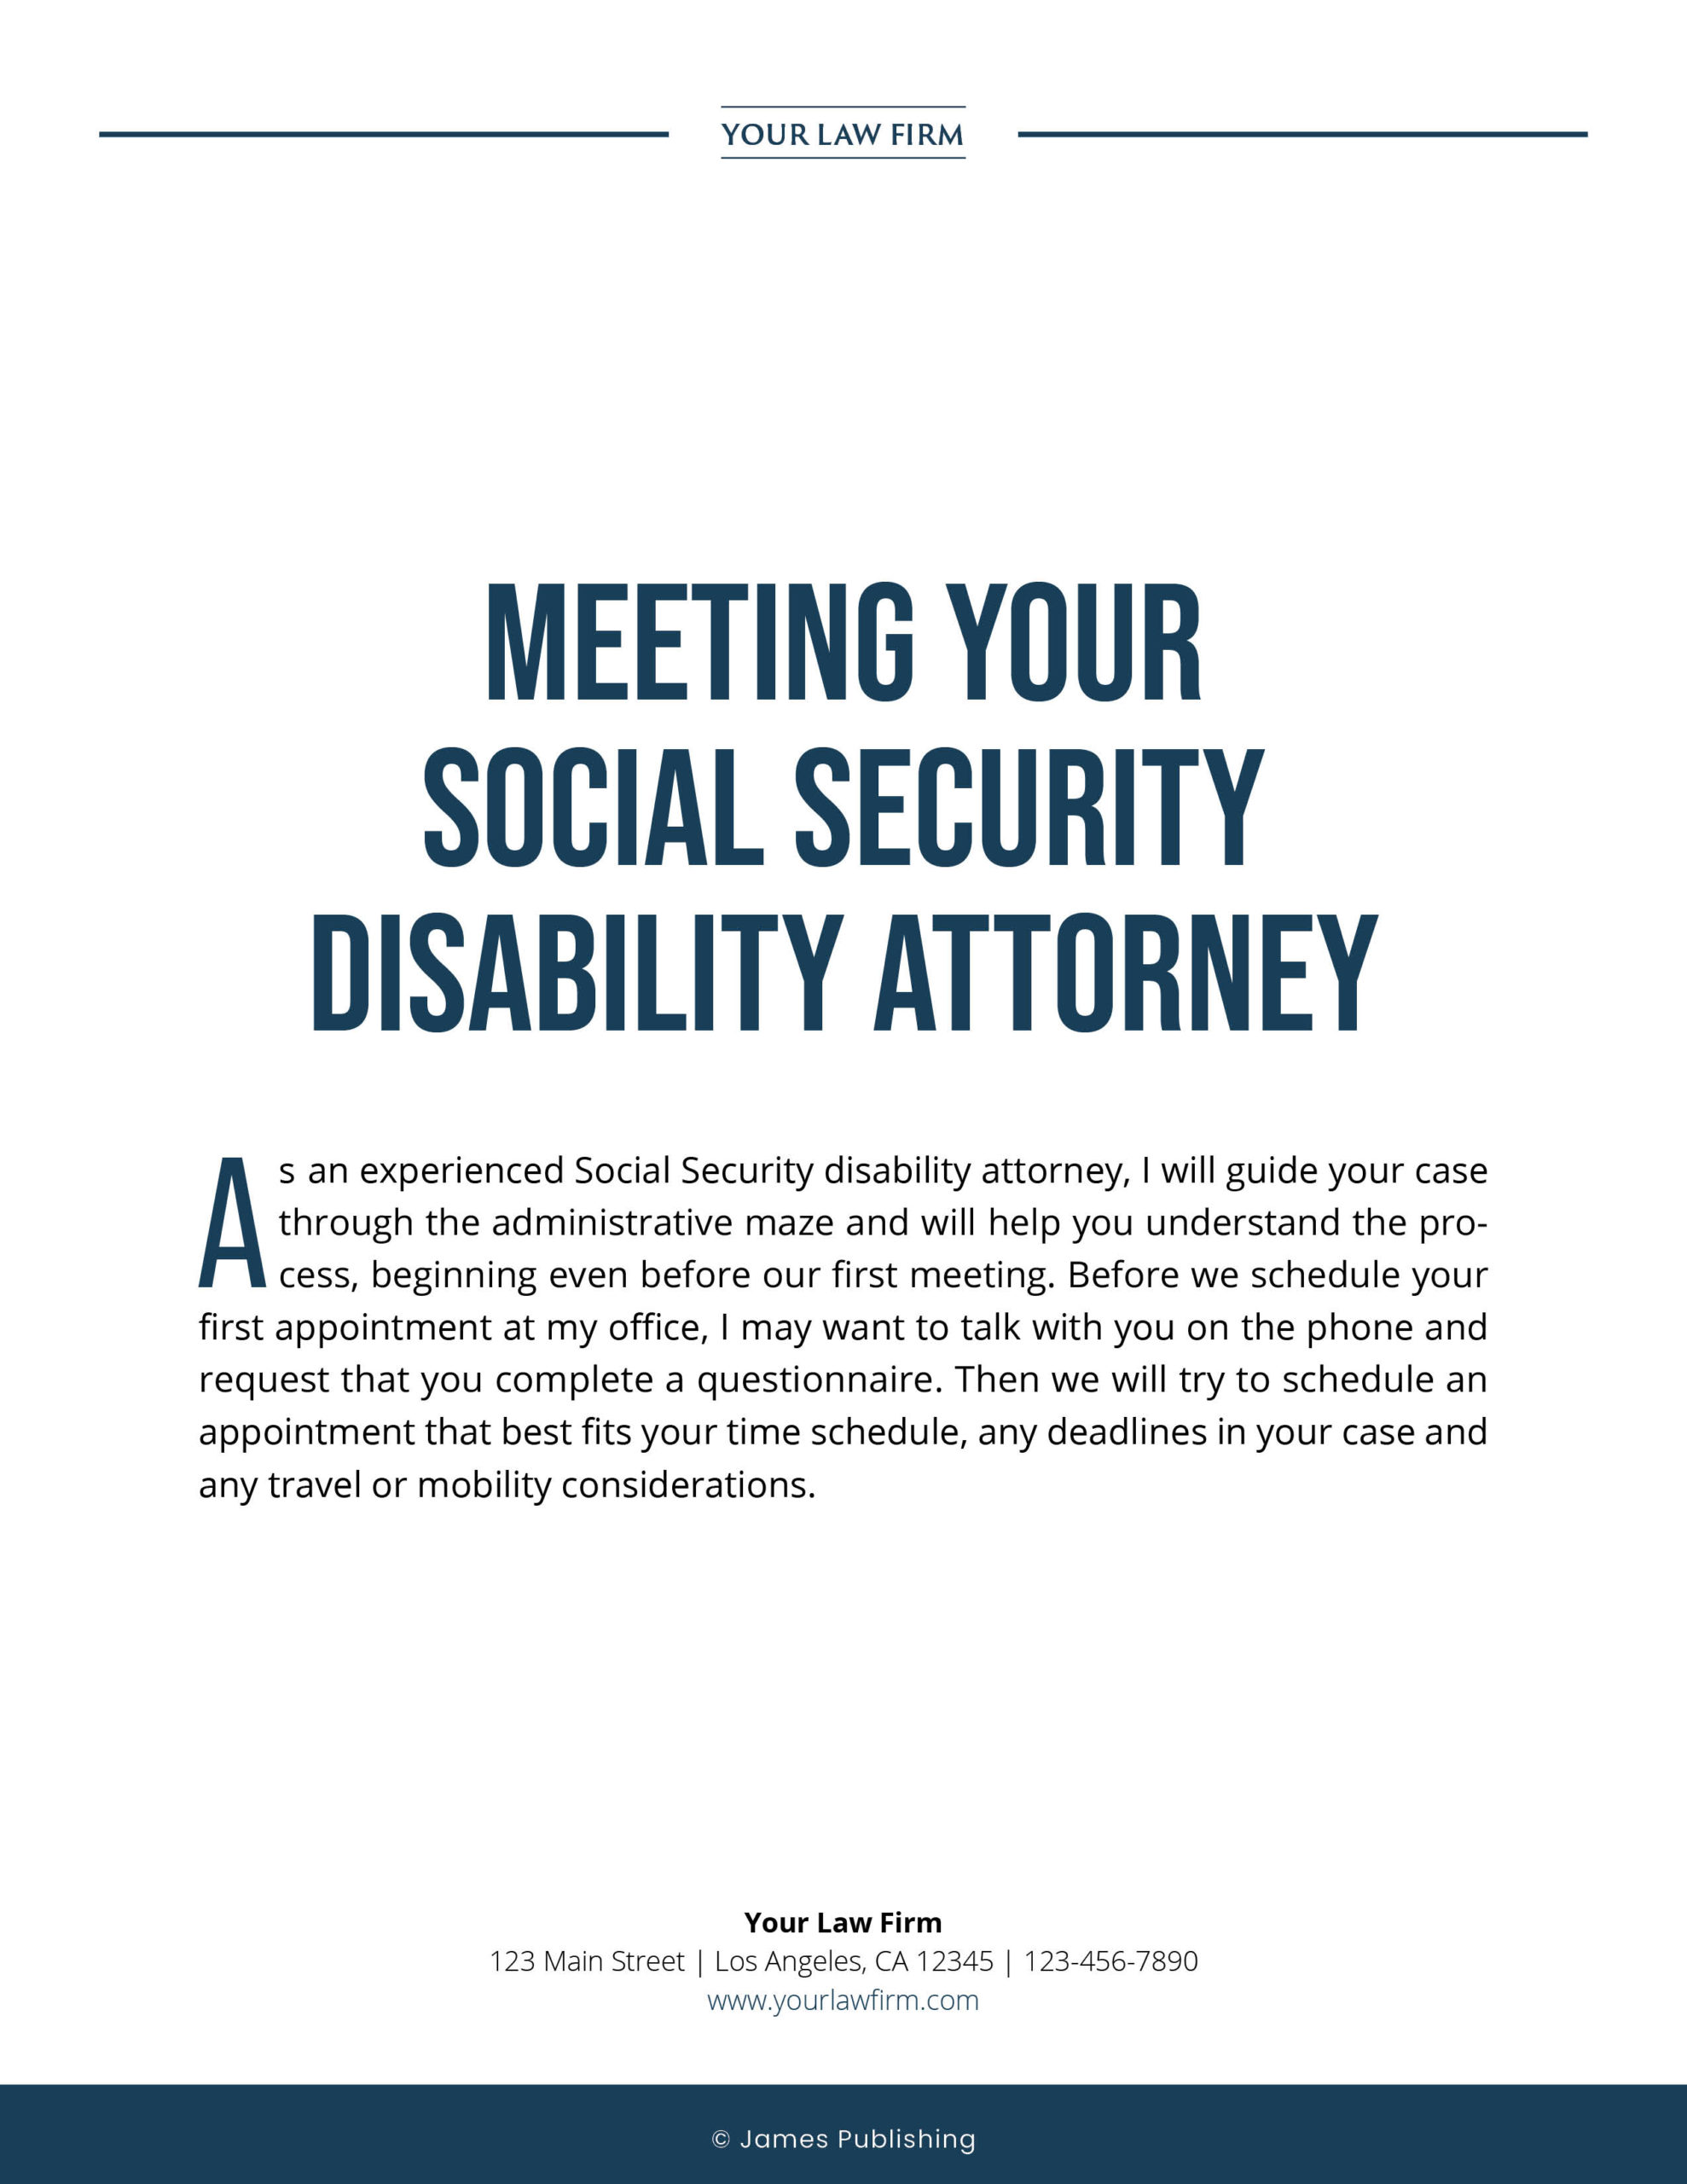 SSD-10 Meeting Your Social Security Disability Attorney